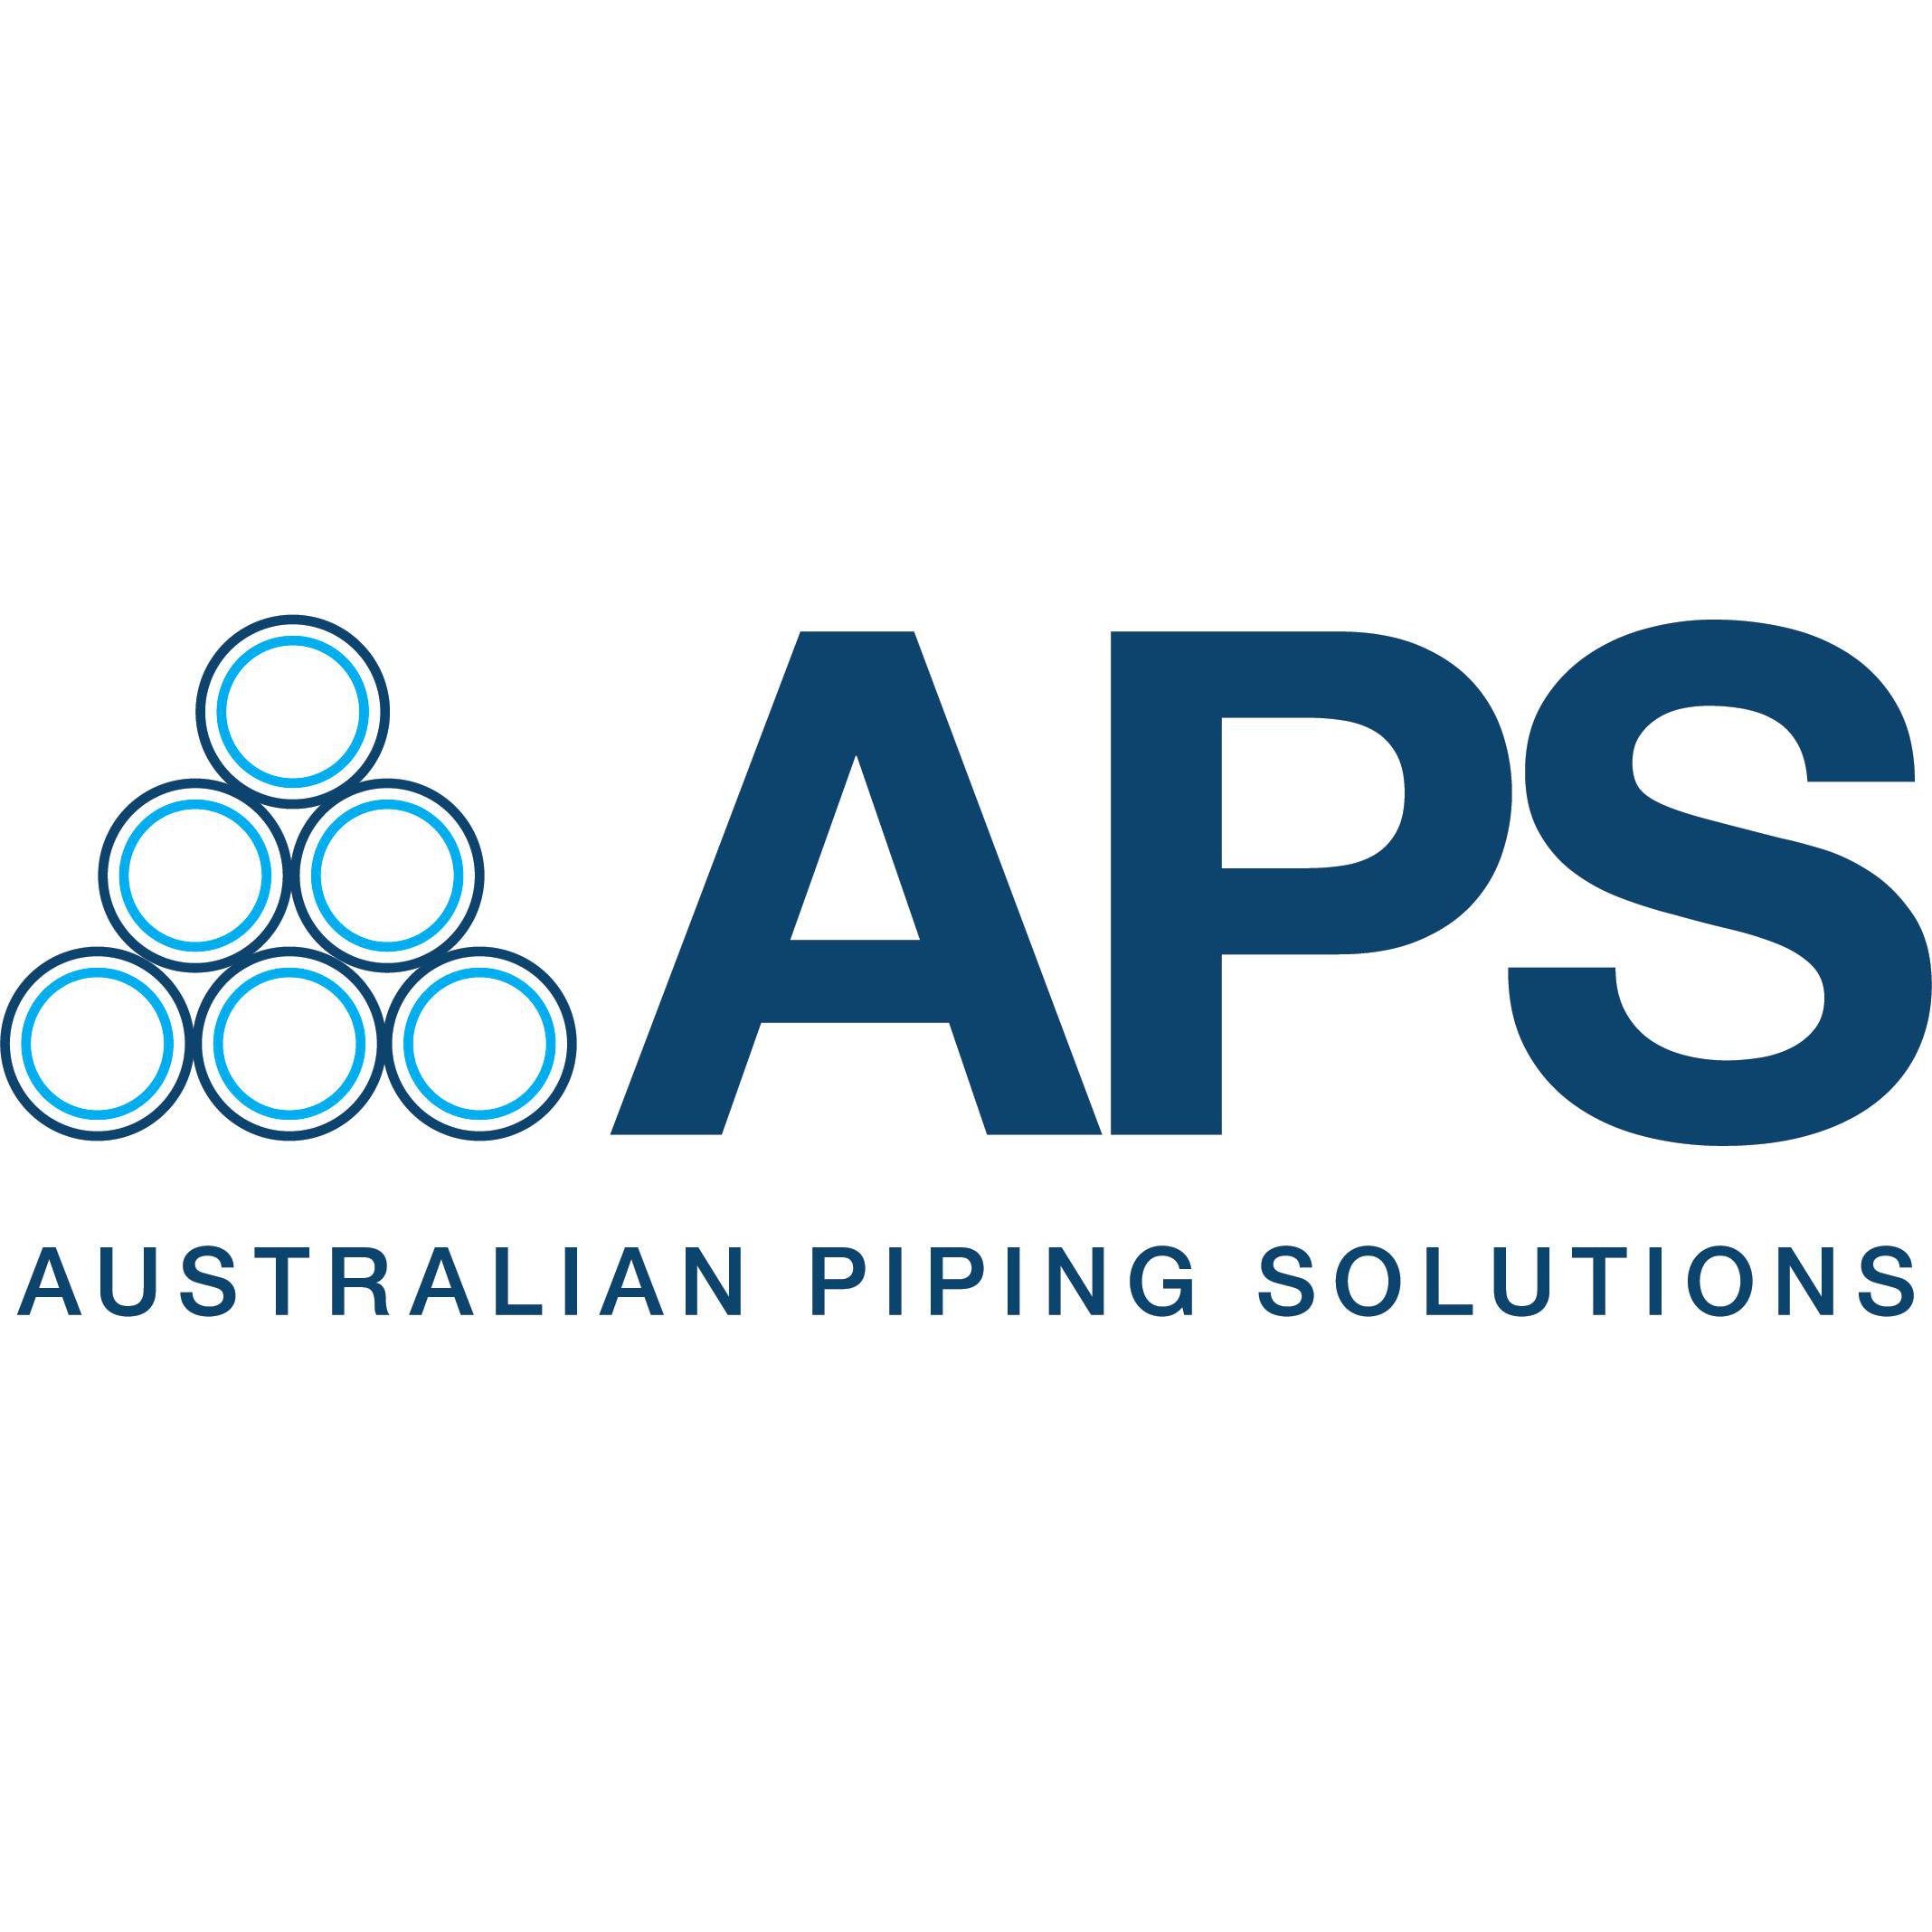 Australian Piping Solutions Pty Ltd - Bohle, QLD - (13) 0060 8148 | ShowMeLocal.com